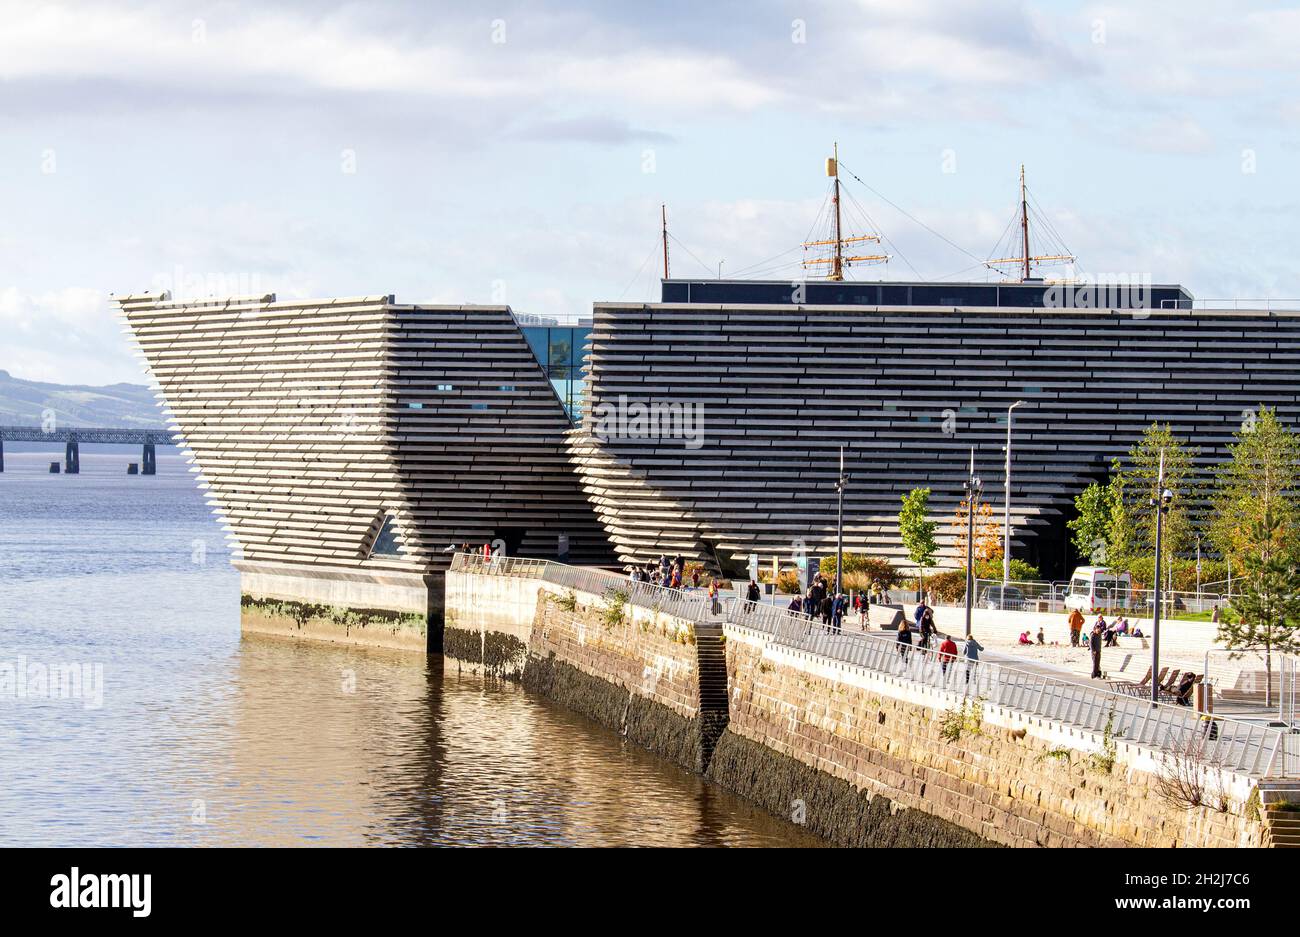 Dundee, Tayside, Scotland, UK. 22nd Oct, 2021. UK Weather: Warm Autumn sunshine across North East Scotland with temperatures reaching 12°C. Autumn landscape showing a breathtaking view of the V&A Design Museum along the Dundee waterfront observed from the Tay road bridge. Credit: Dundee Photographics/Alamy Live News Stock Photo